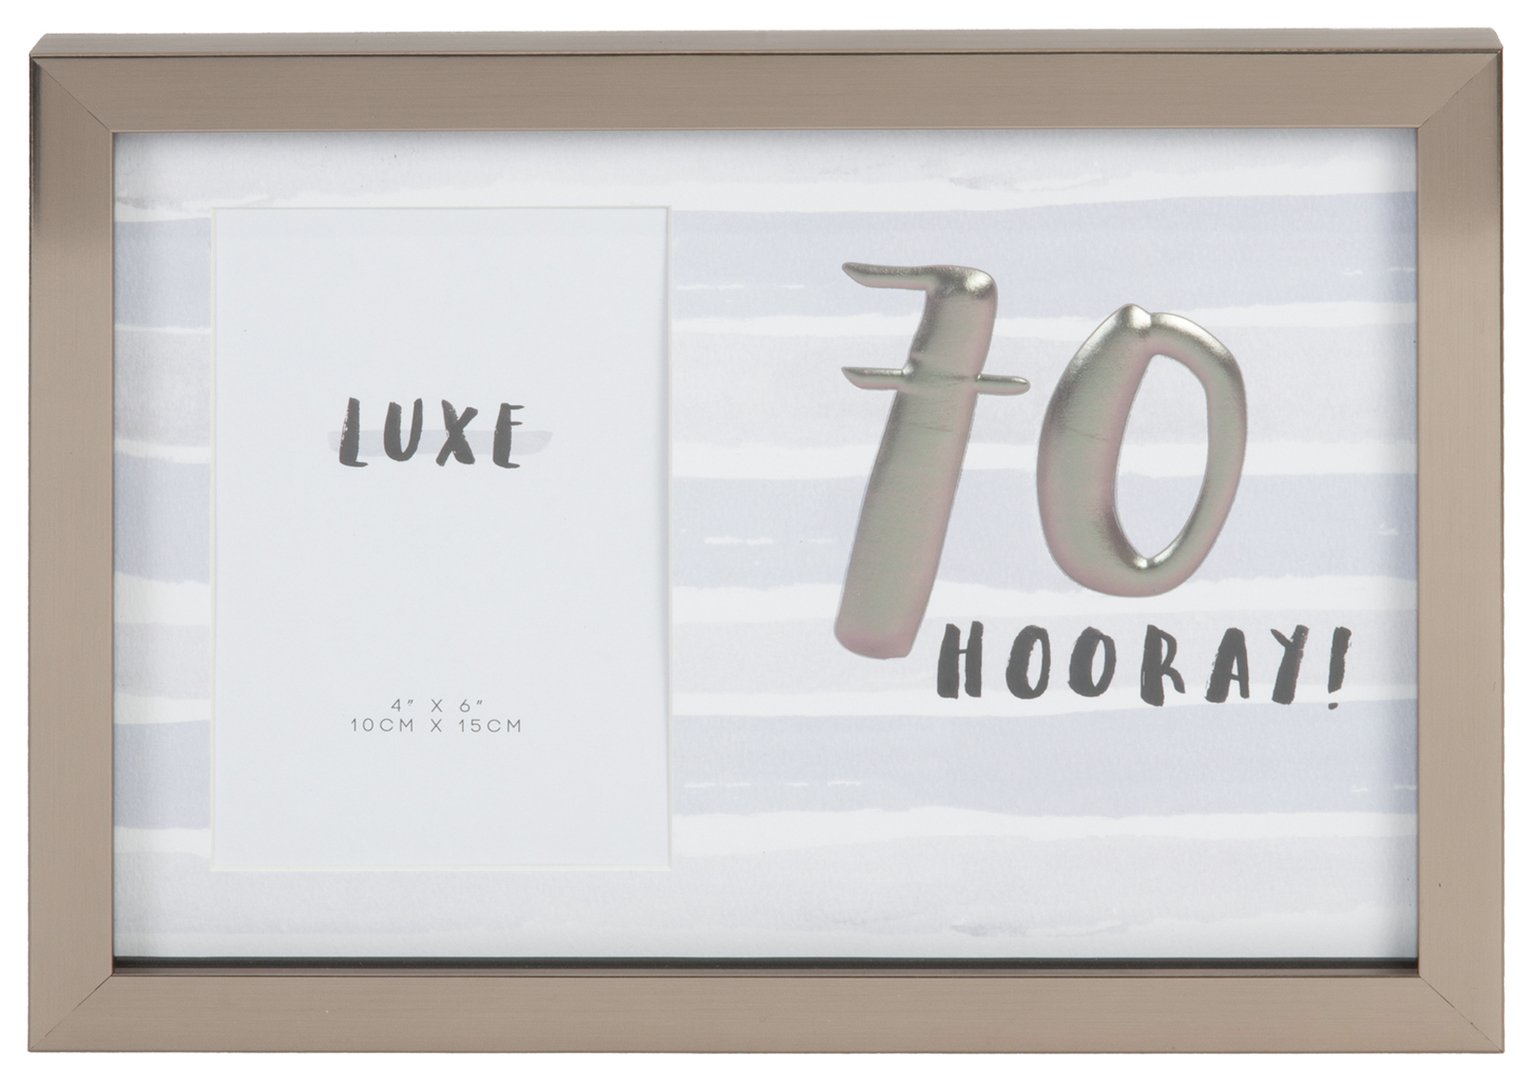 Hotchpotch Luxe 70th Birthday Photo Frame - Grey